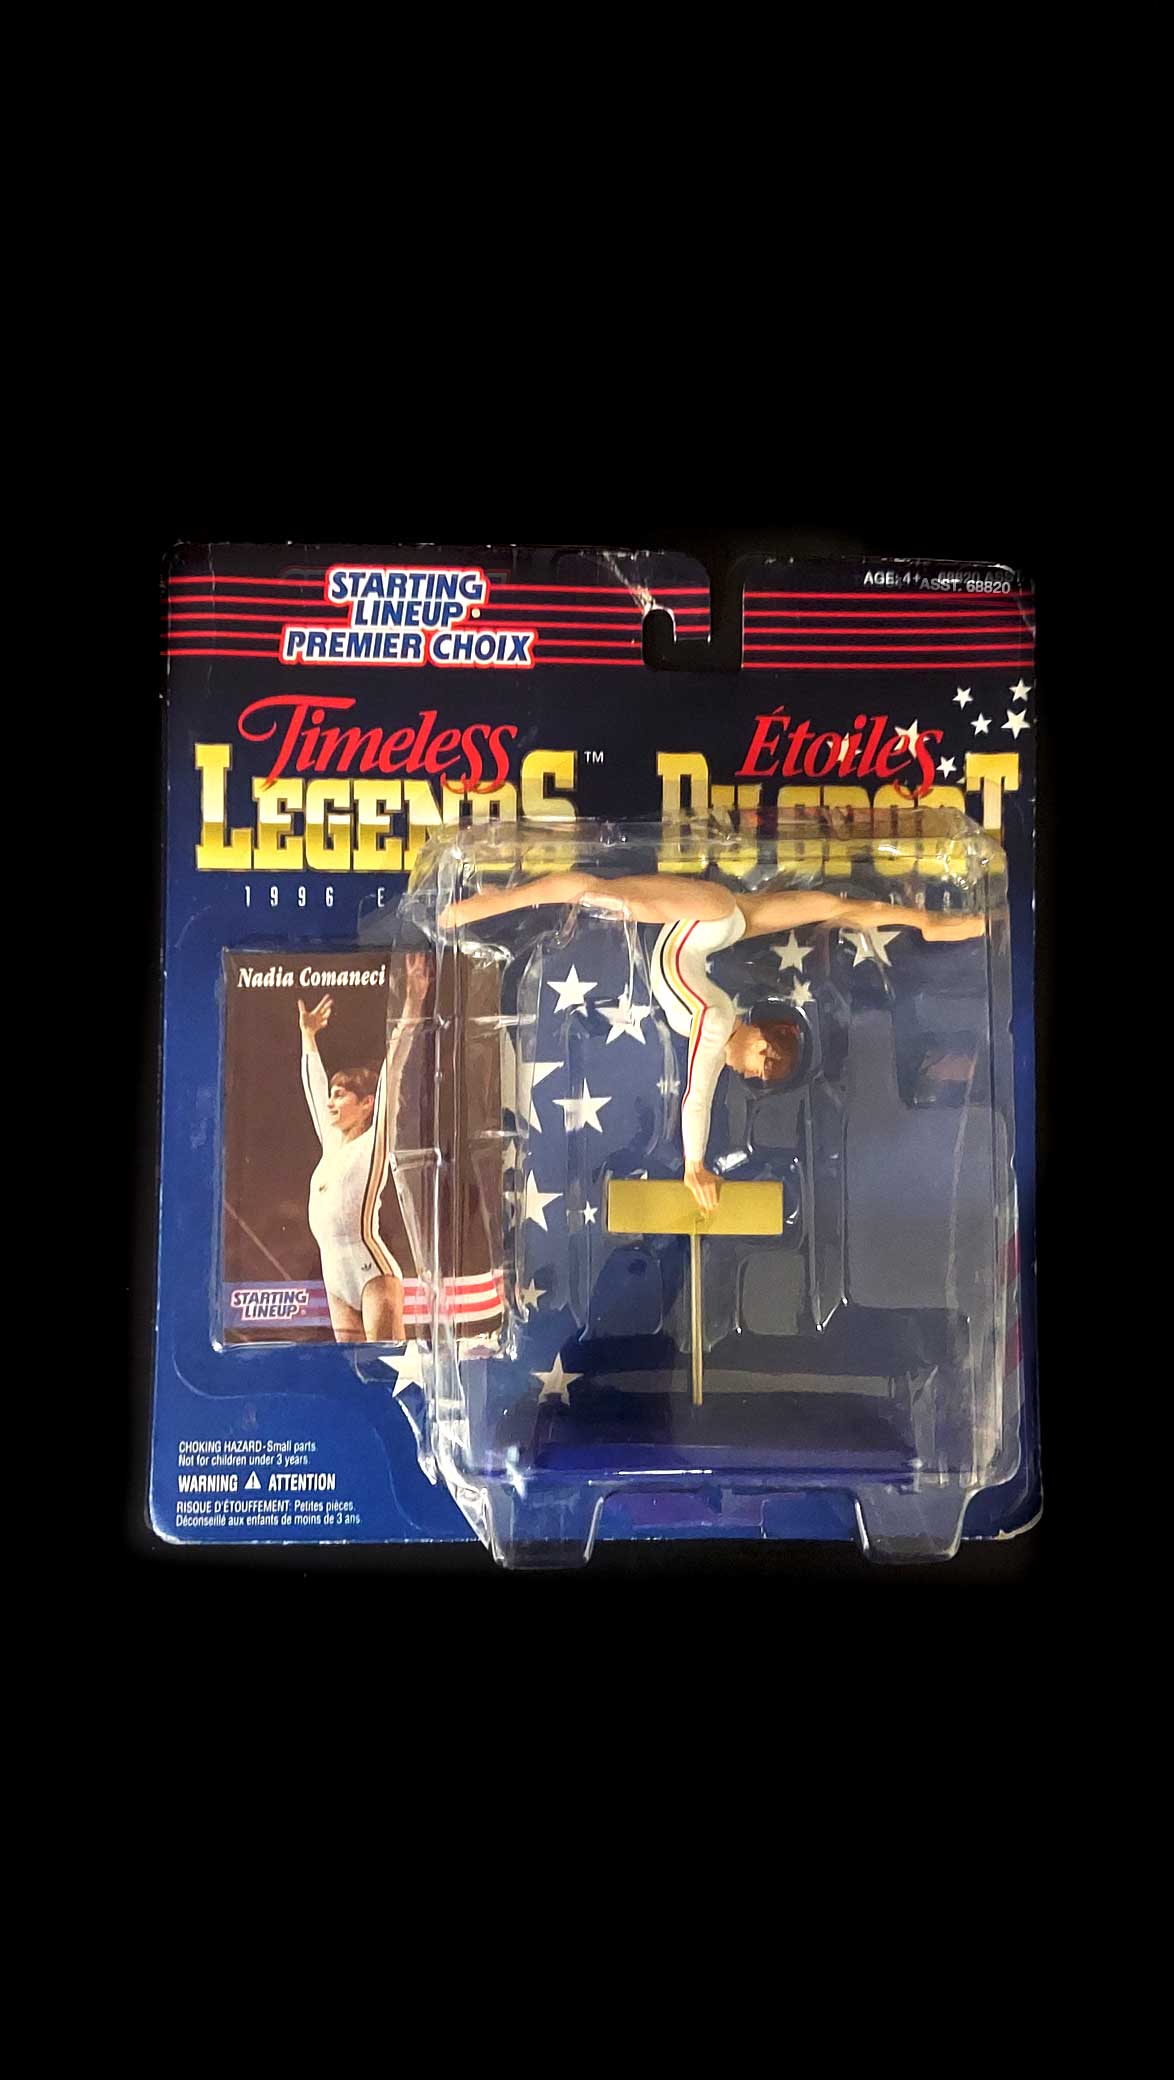 Nadia-Comaneci-Timeless-Legends-1996-Edition-Starting-Lineup